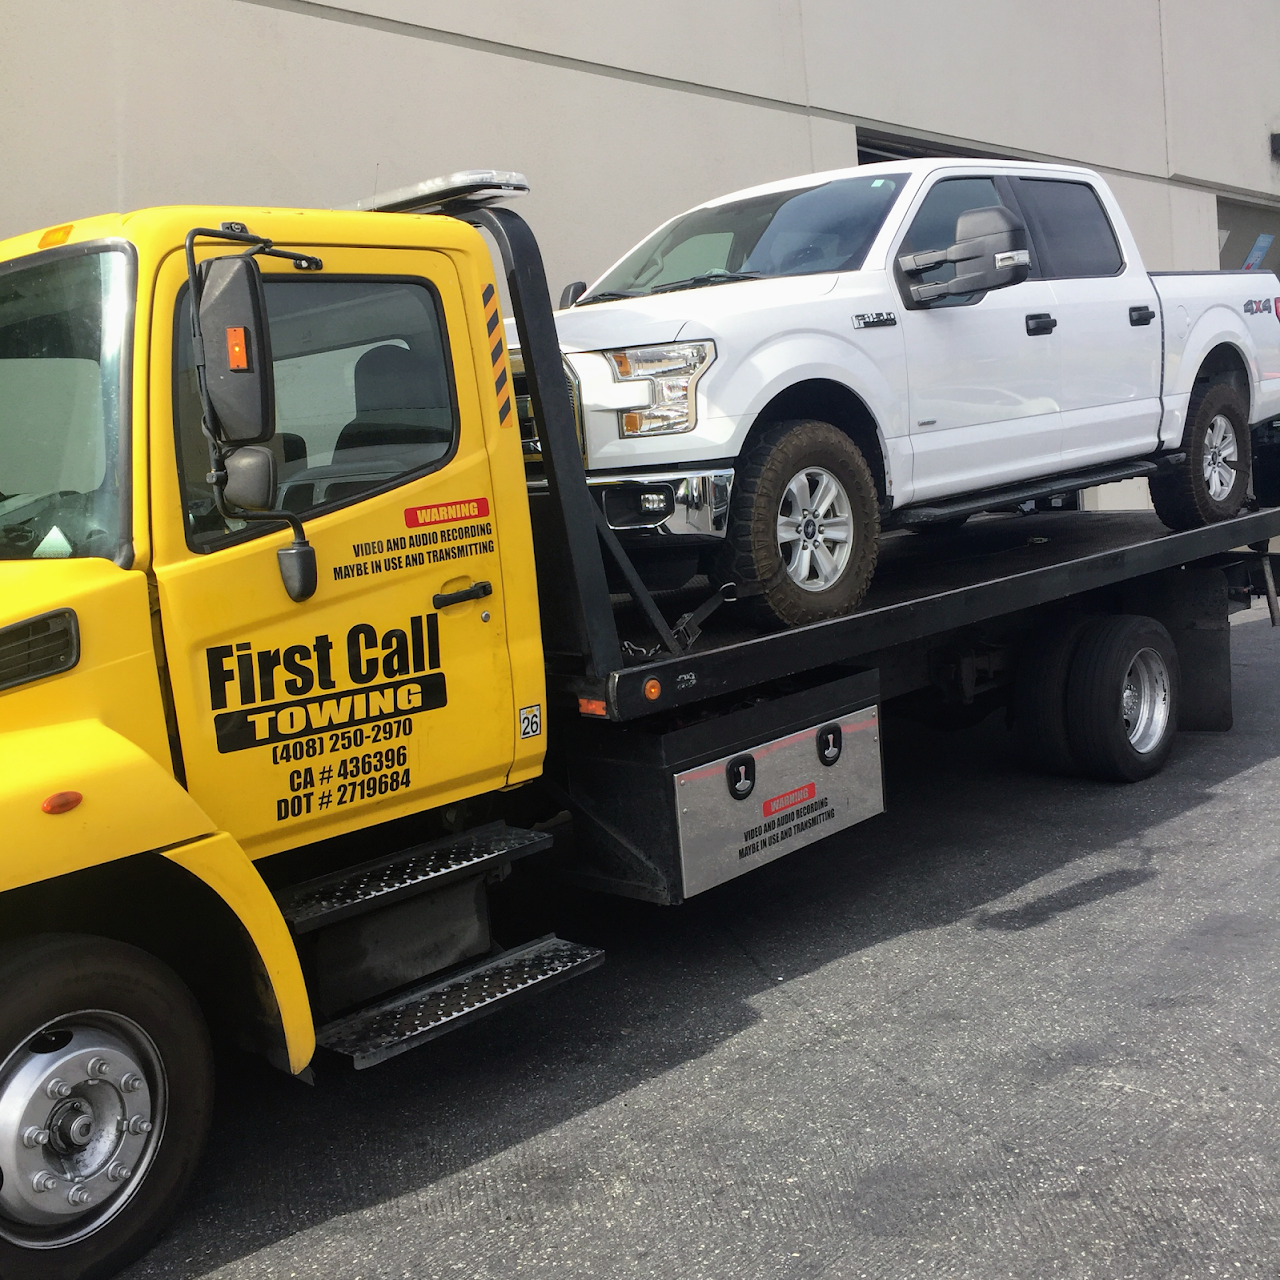 First Call Towing Service